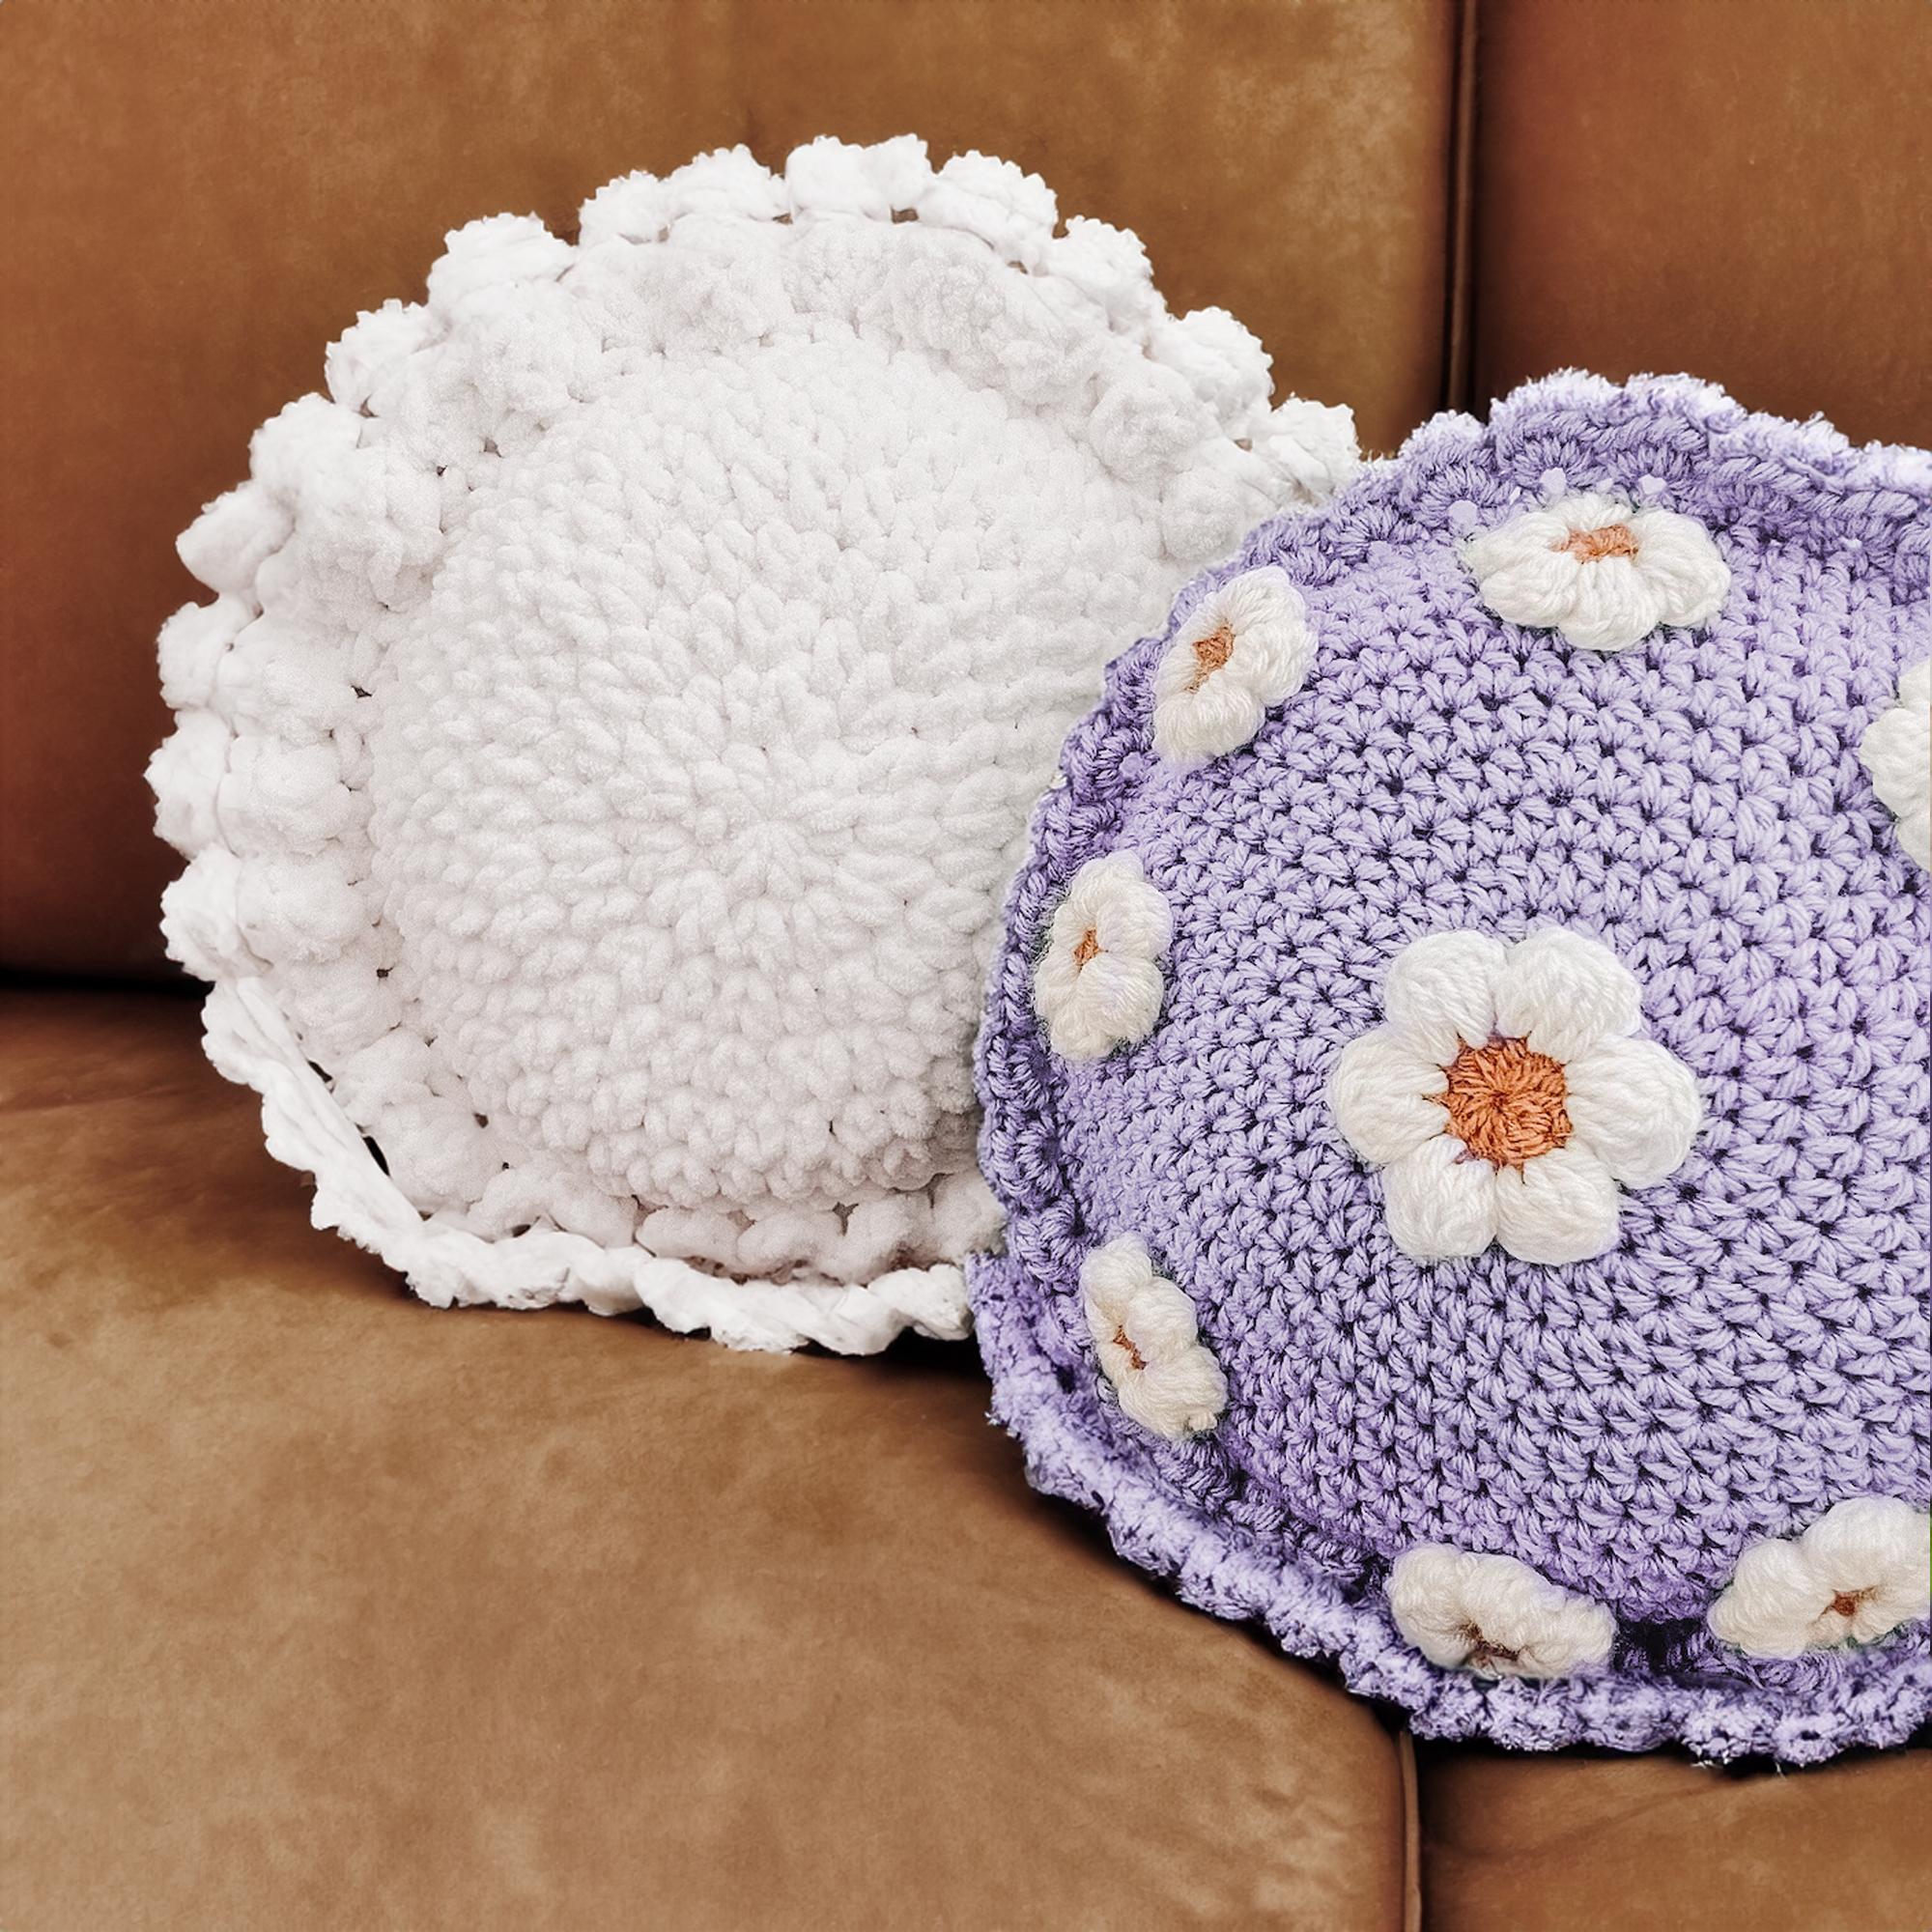 Blooming Pom-Pom Pillow Cover